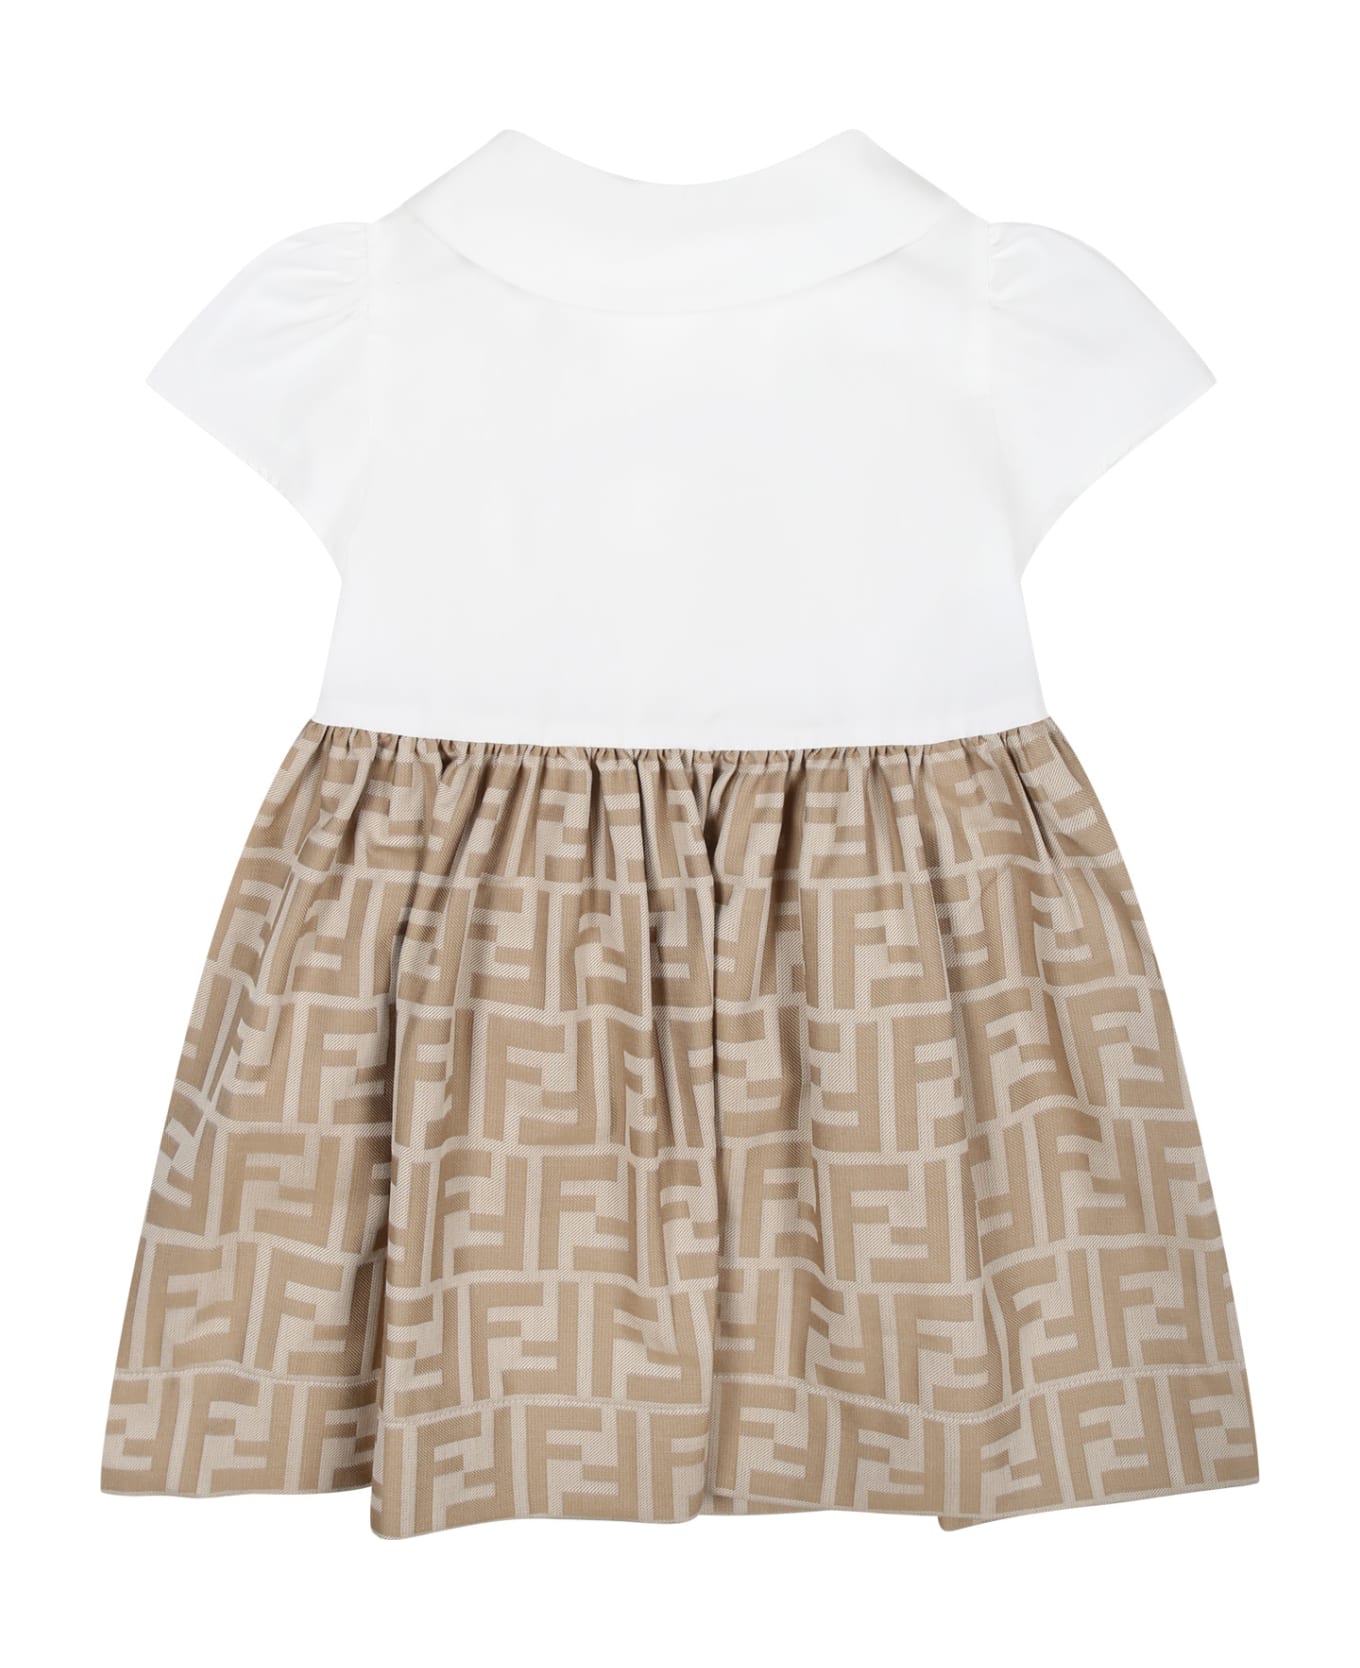 Fendi Multicolor Dress For Baby Girl With Iconic Ff - Multicolor